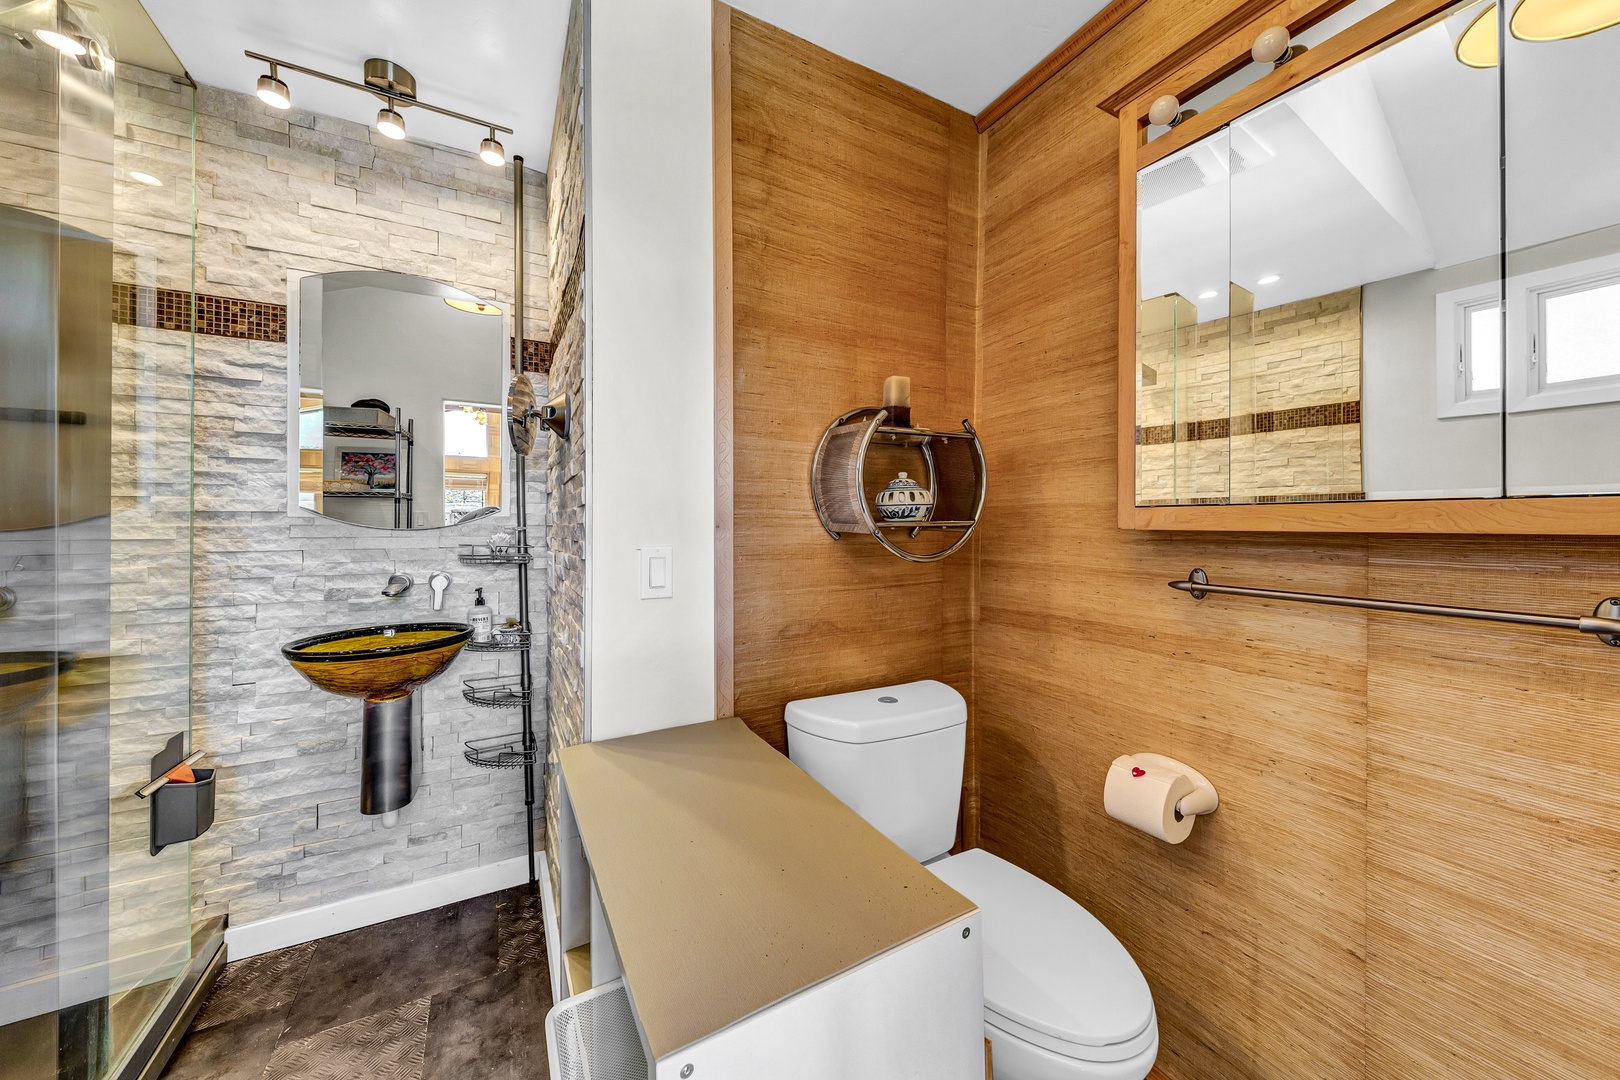 Step into luxury with a sleek modern bathroom and walk-in shower